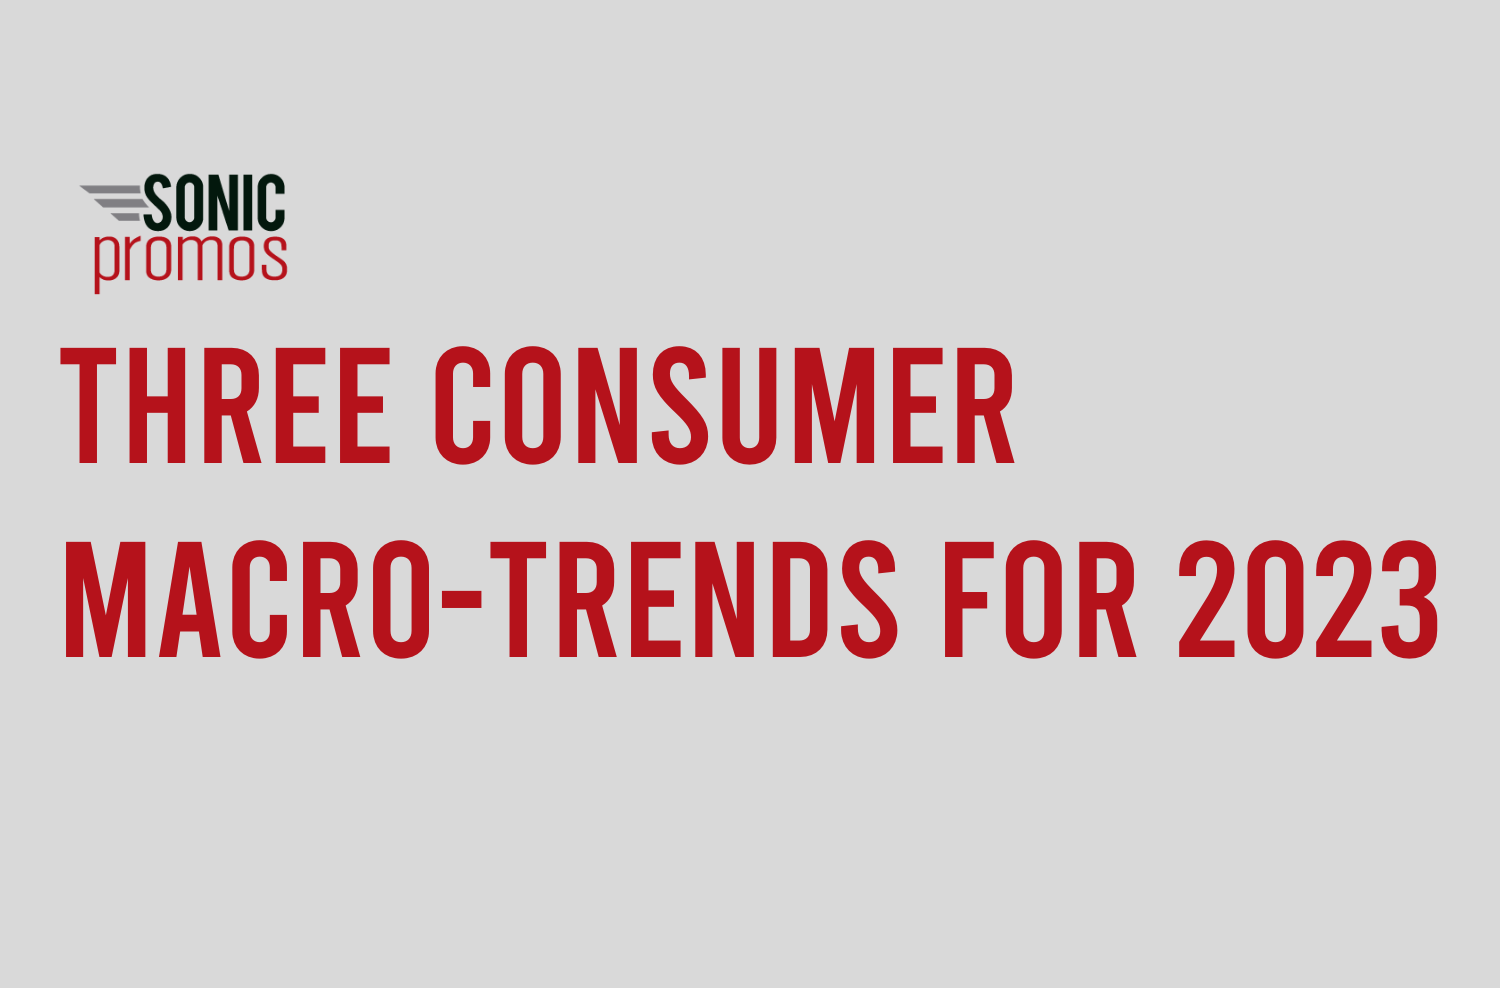 Red text on grey background. Text reads: "three consumer macro-trends for 2023"